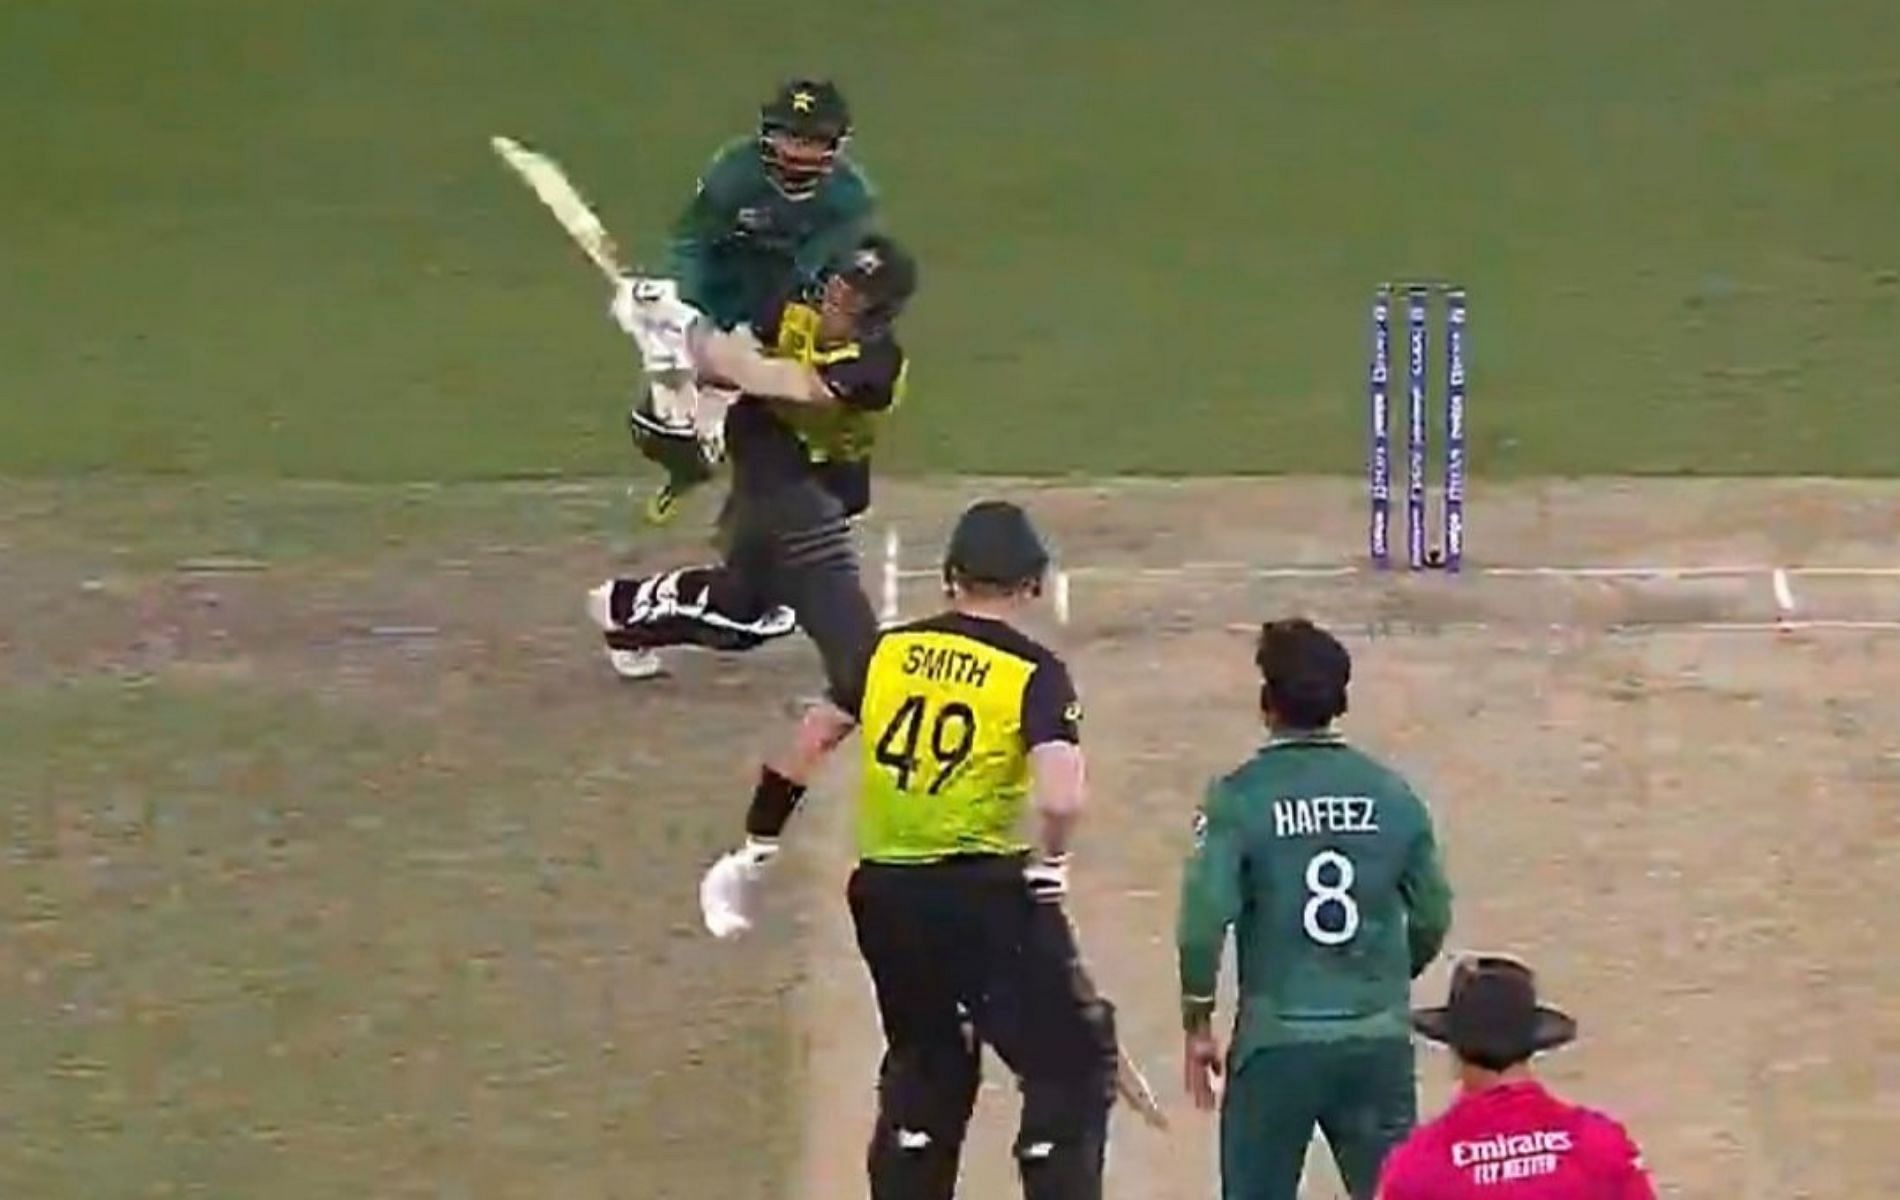 T20 World Cup 2021: David Warner hit a six of a double-bounce no-ball.